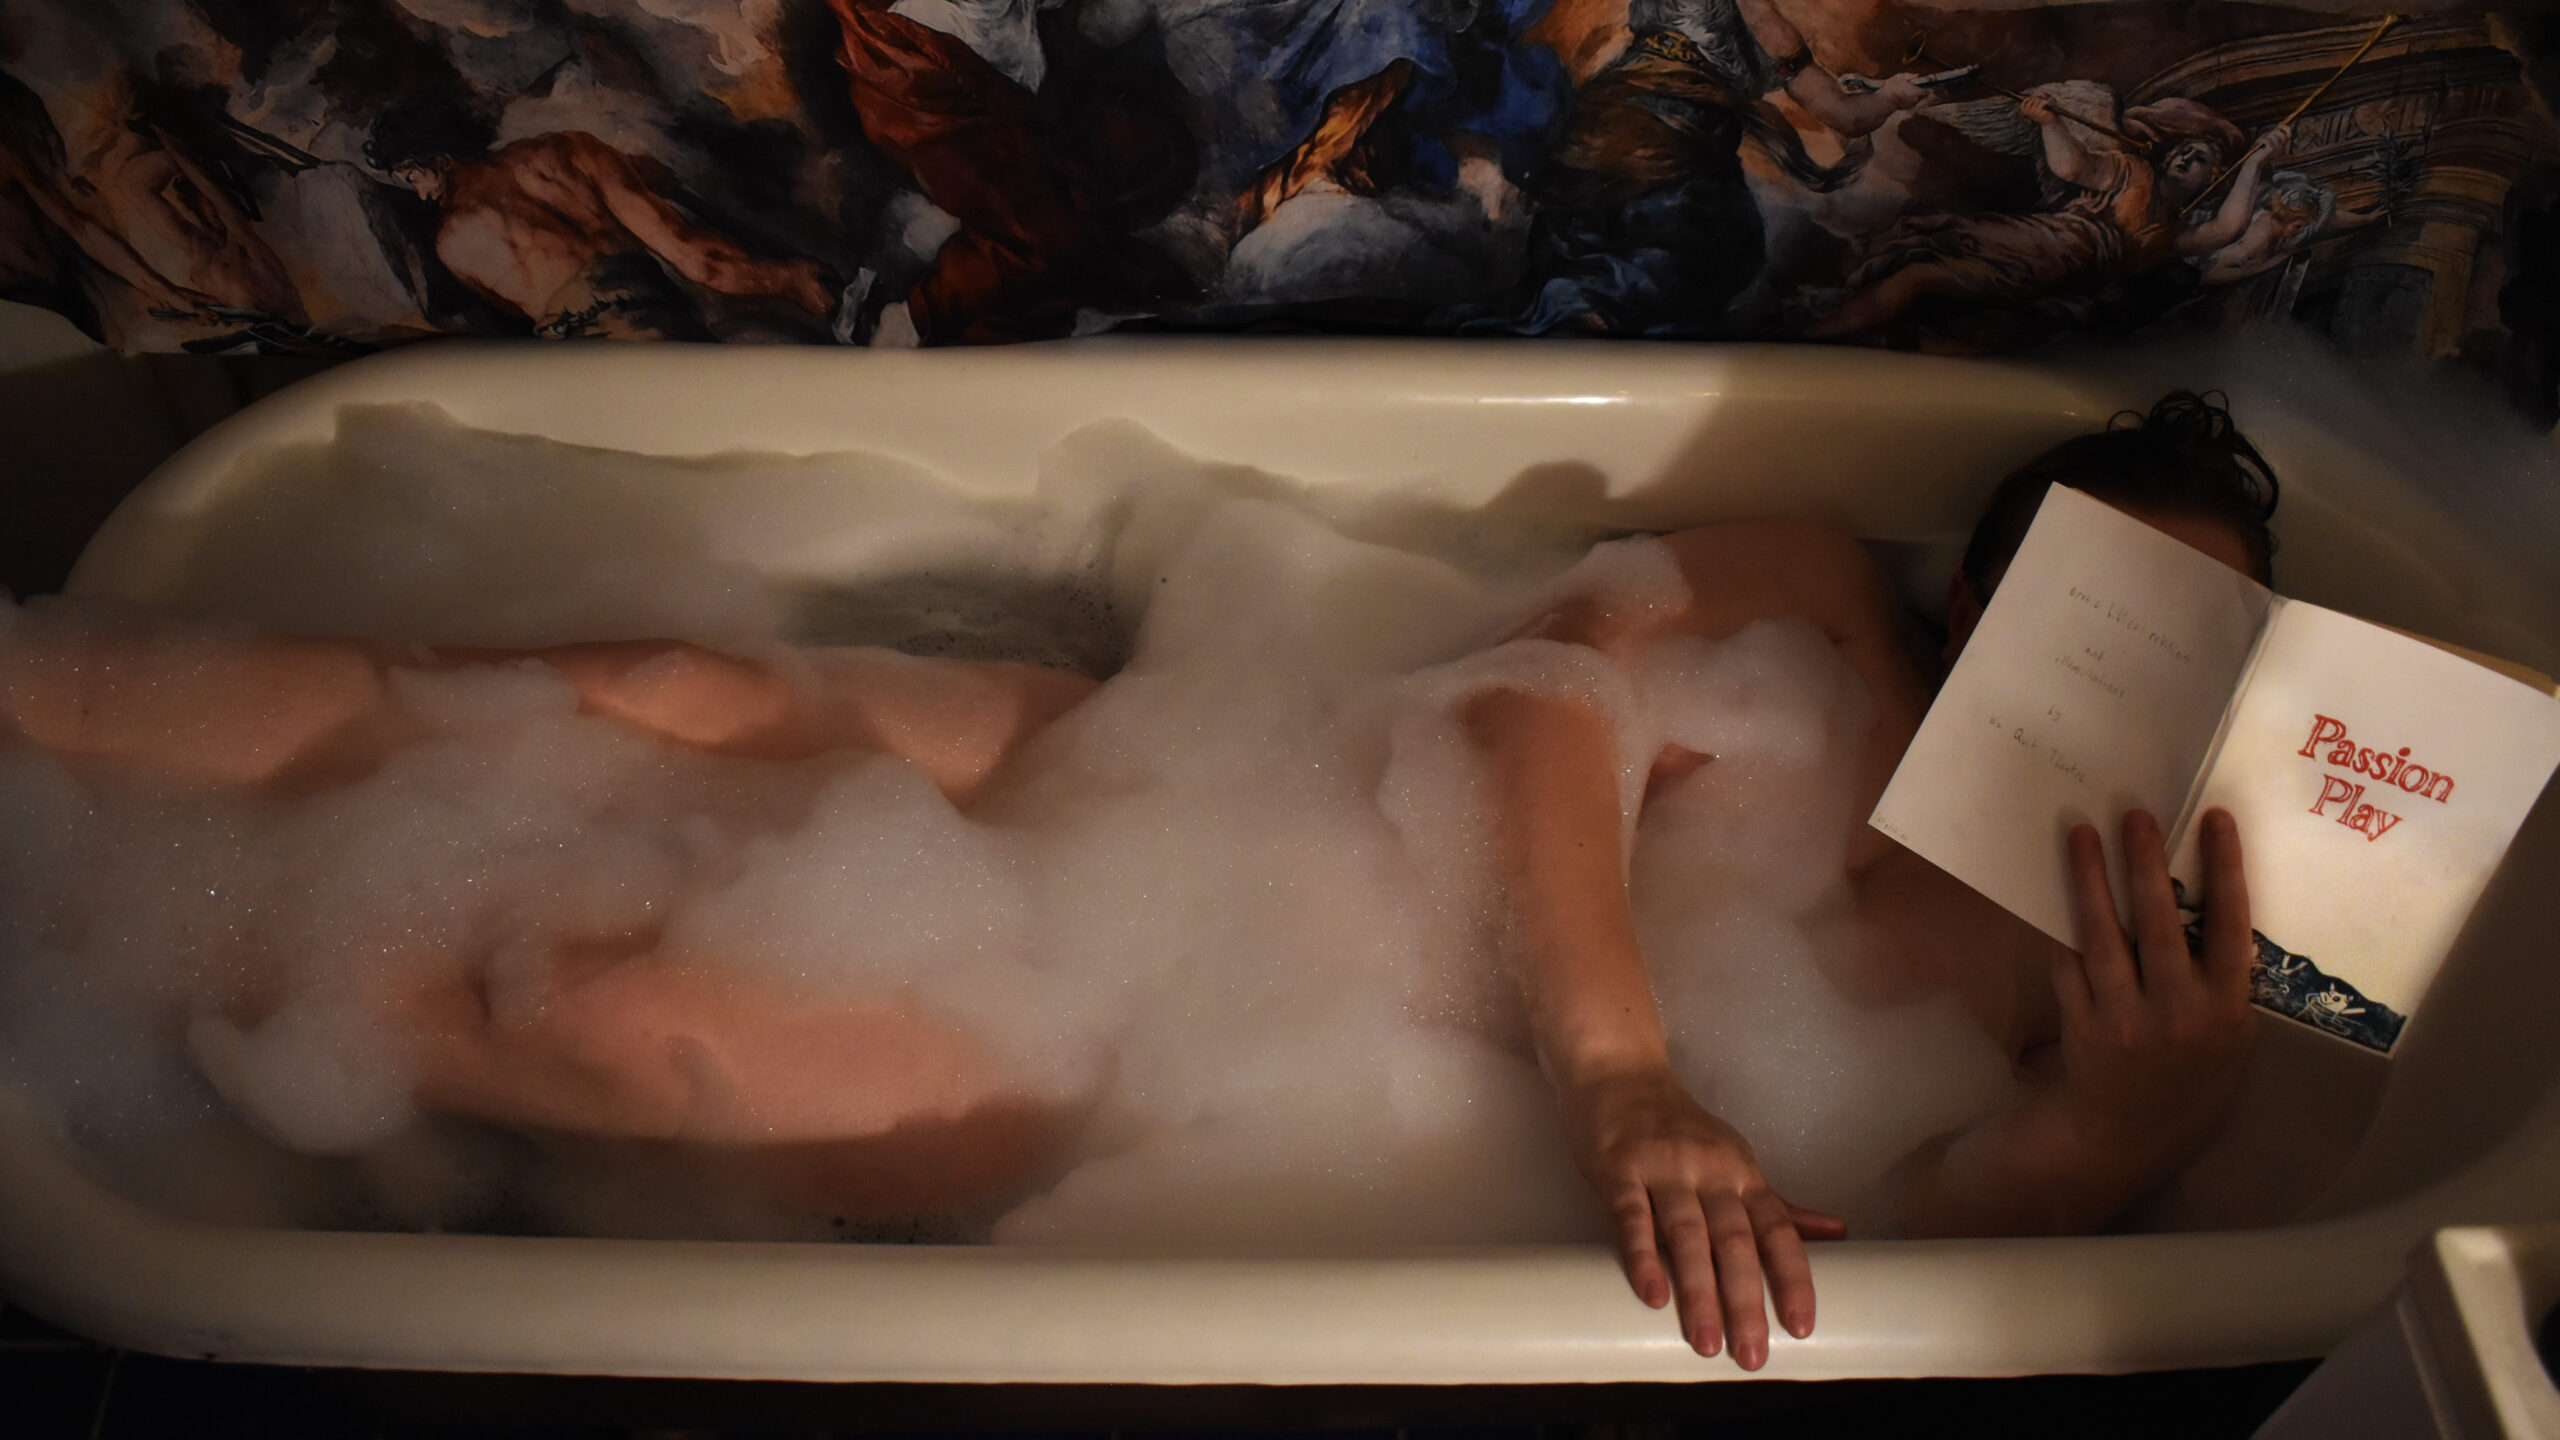 Image of Dasha lying in a bubble bath. She is holding a book open in front of her face titled, "Passion Play"